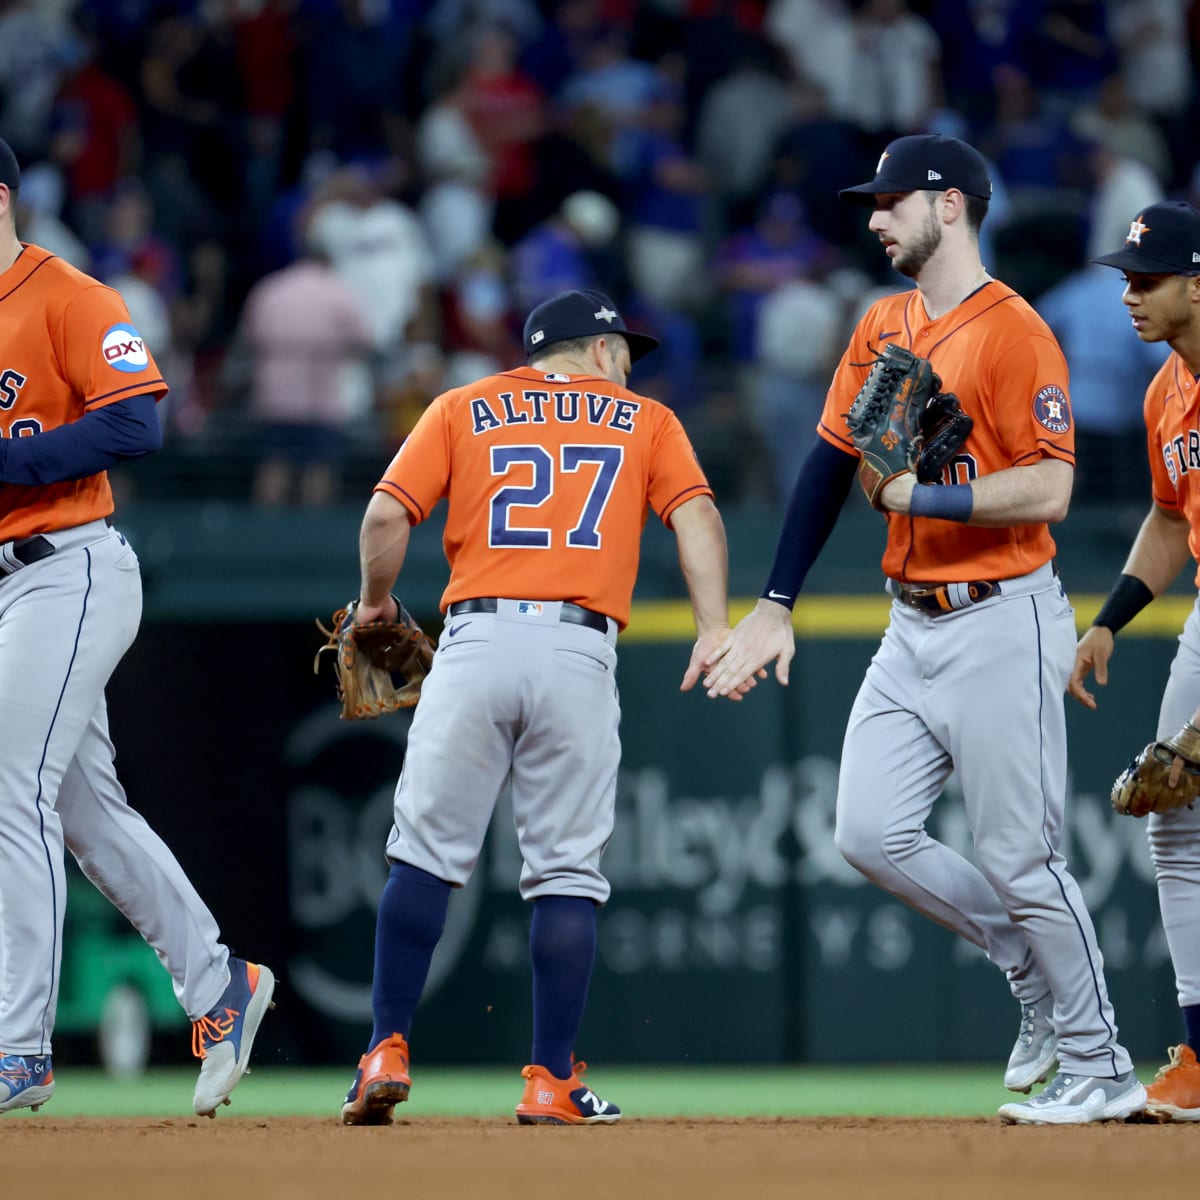 Altuve, Javier lead Astros to 8-5 win at Rangers as Houston closes